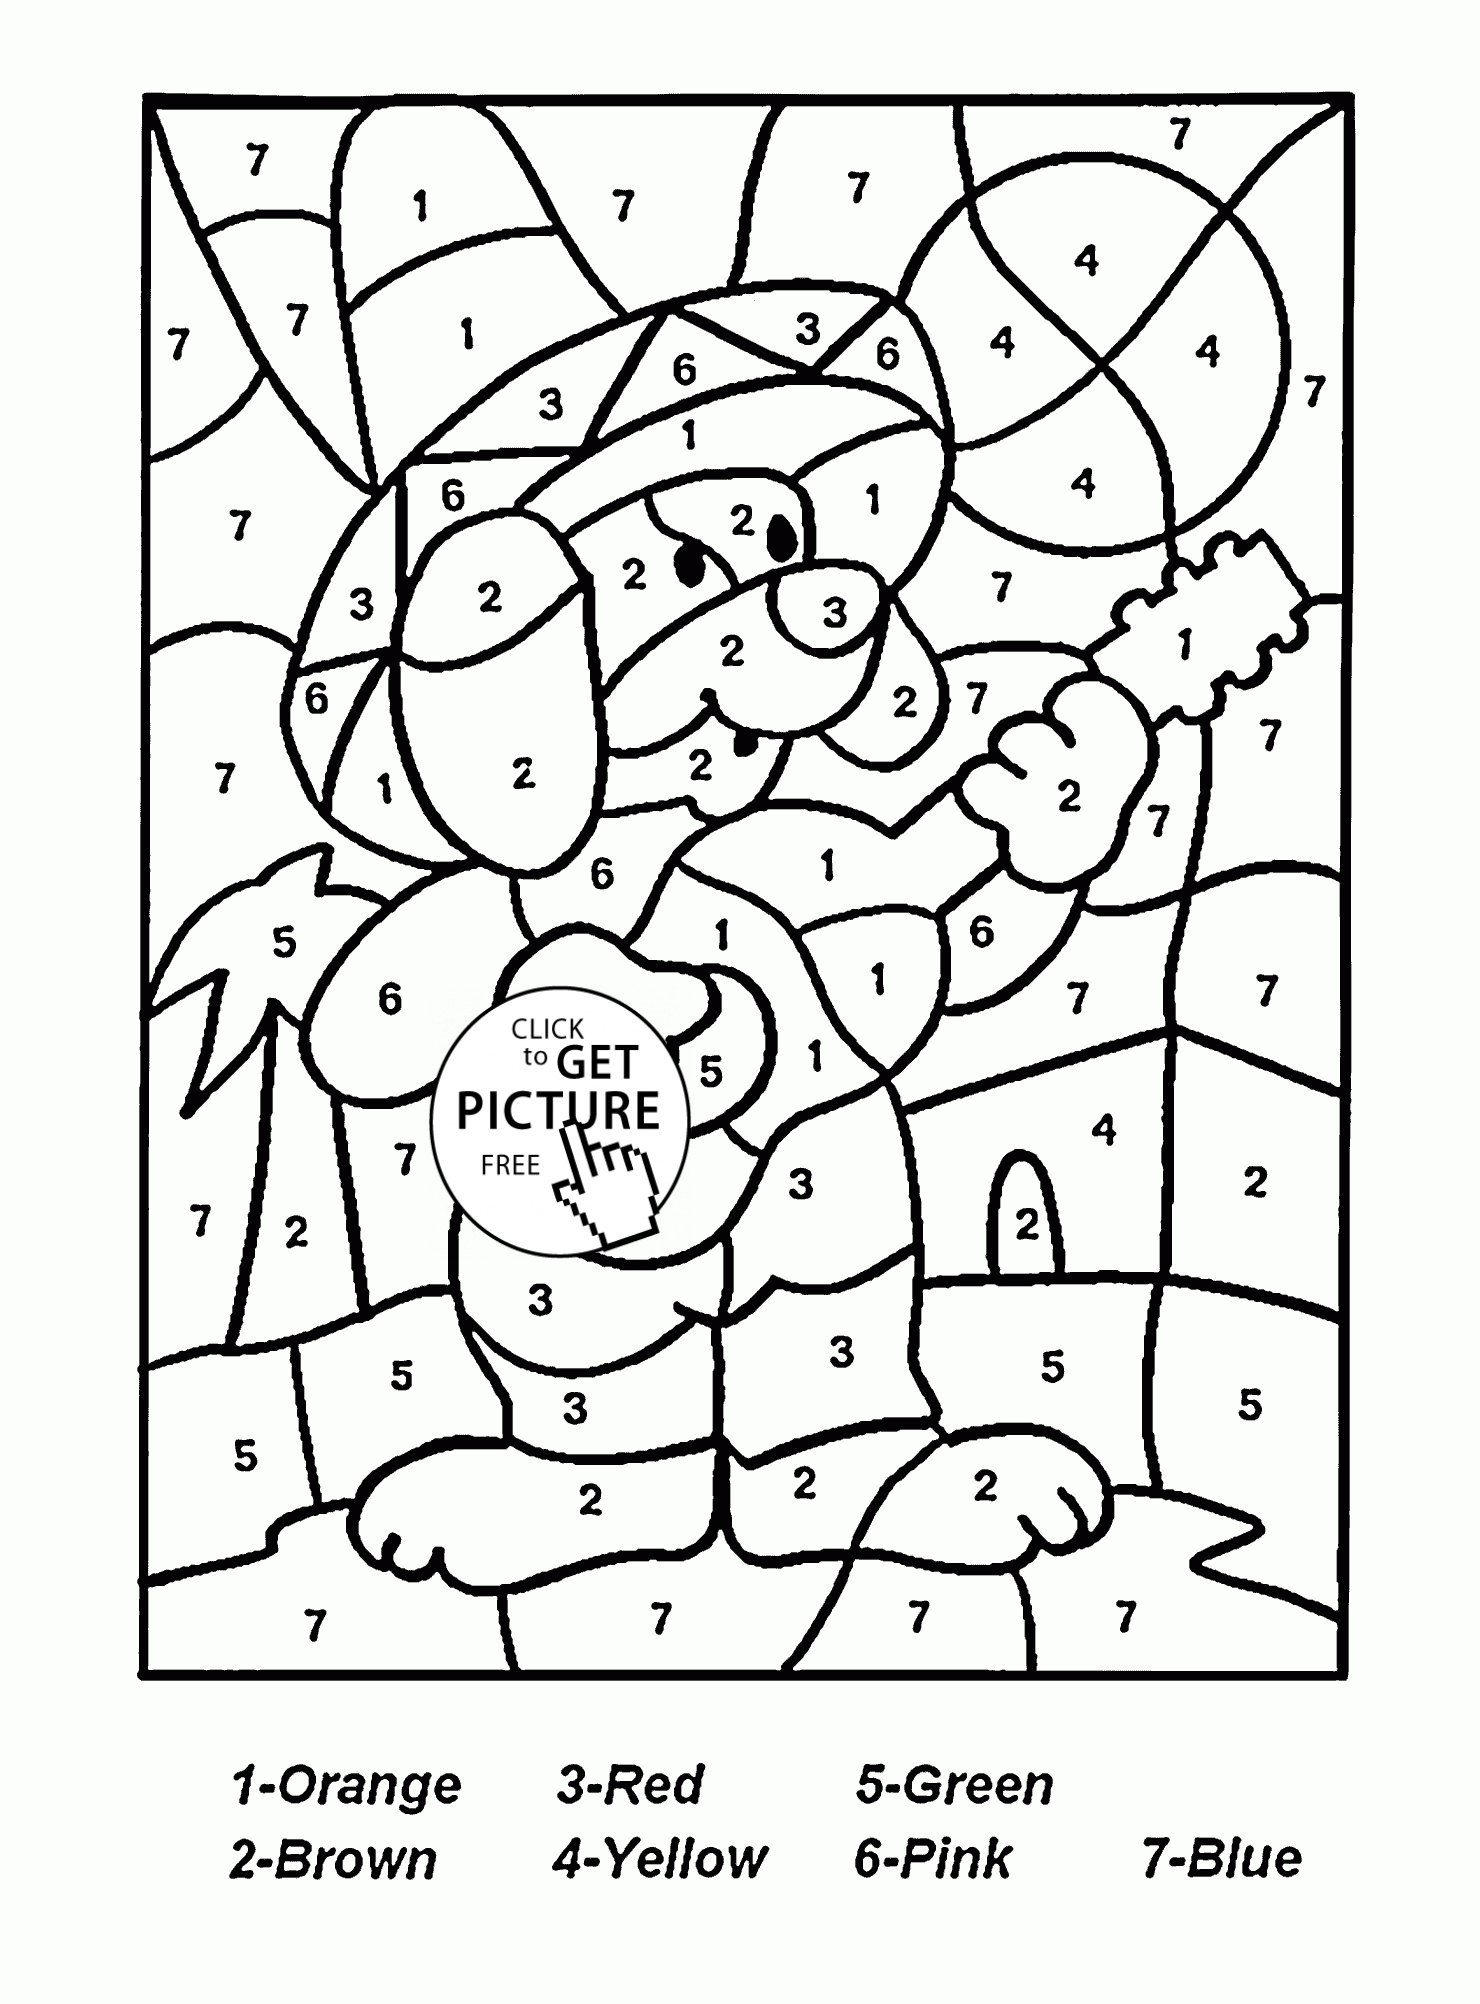 Numbers Coloring Page Color Number Dog Guitar Player Coloring Page For Kids Education